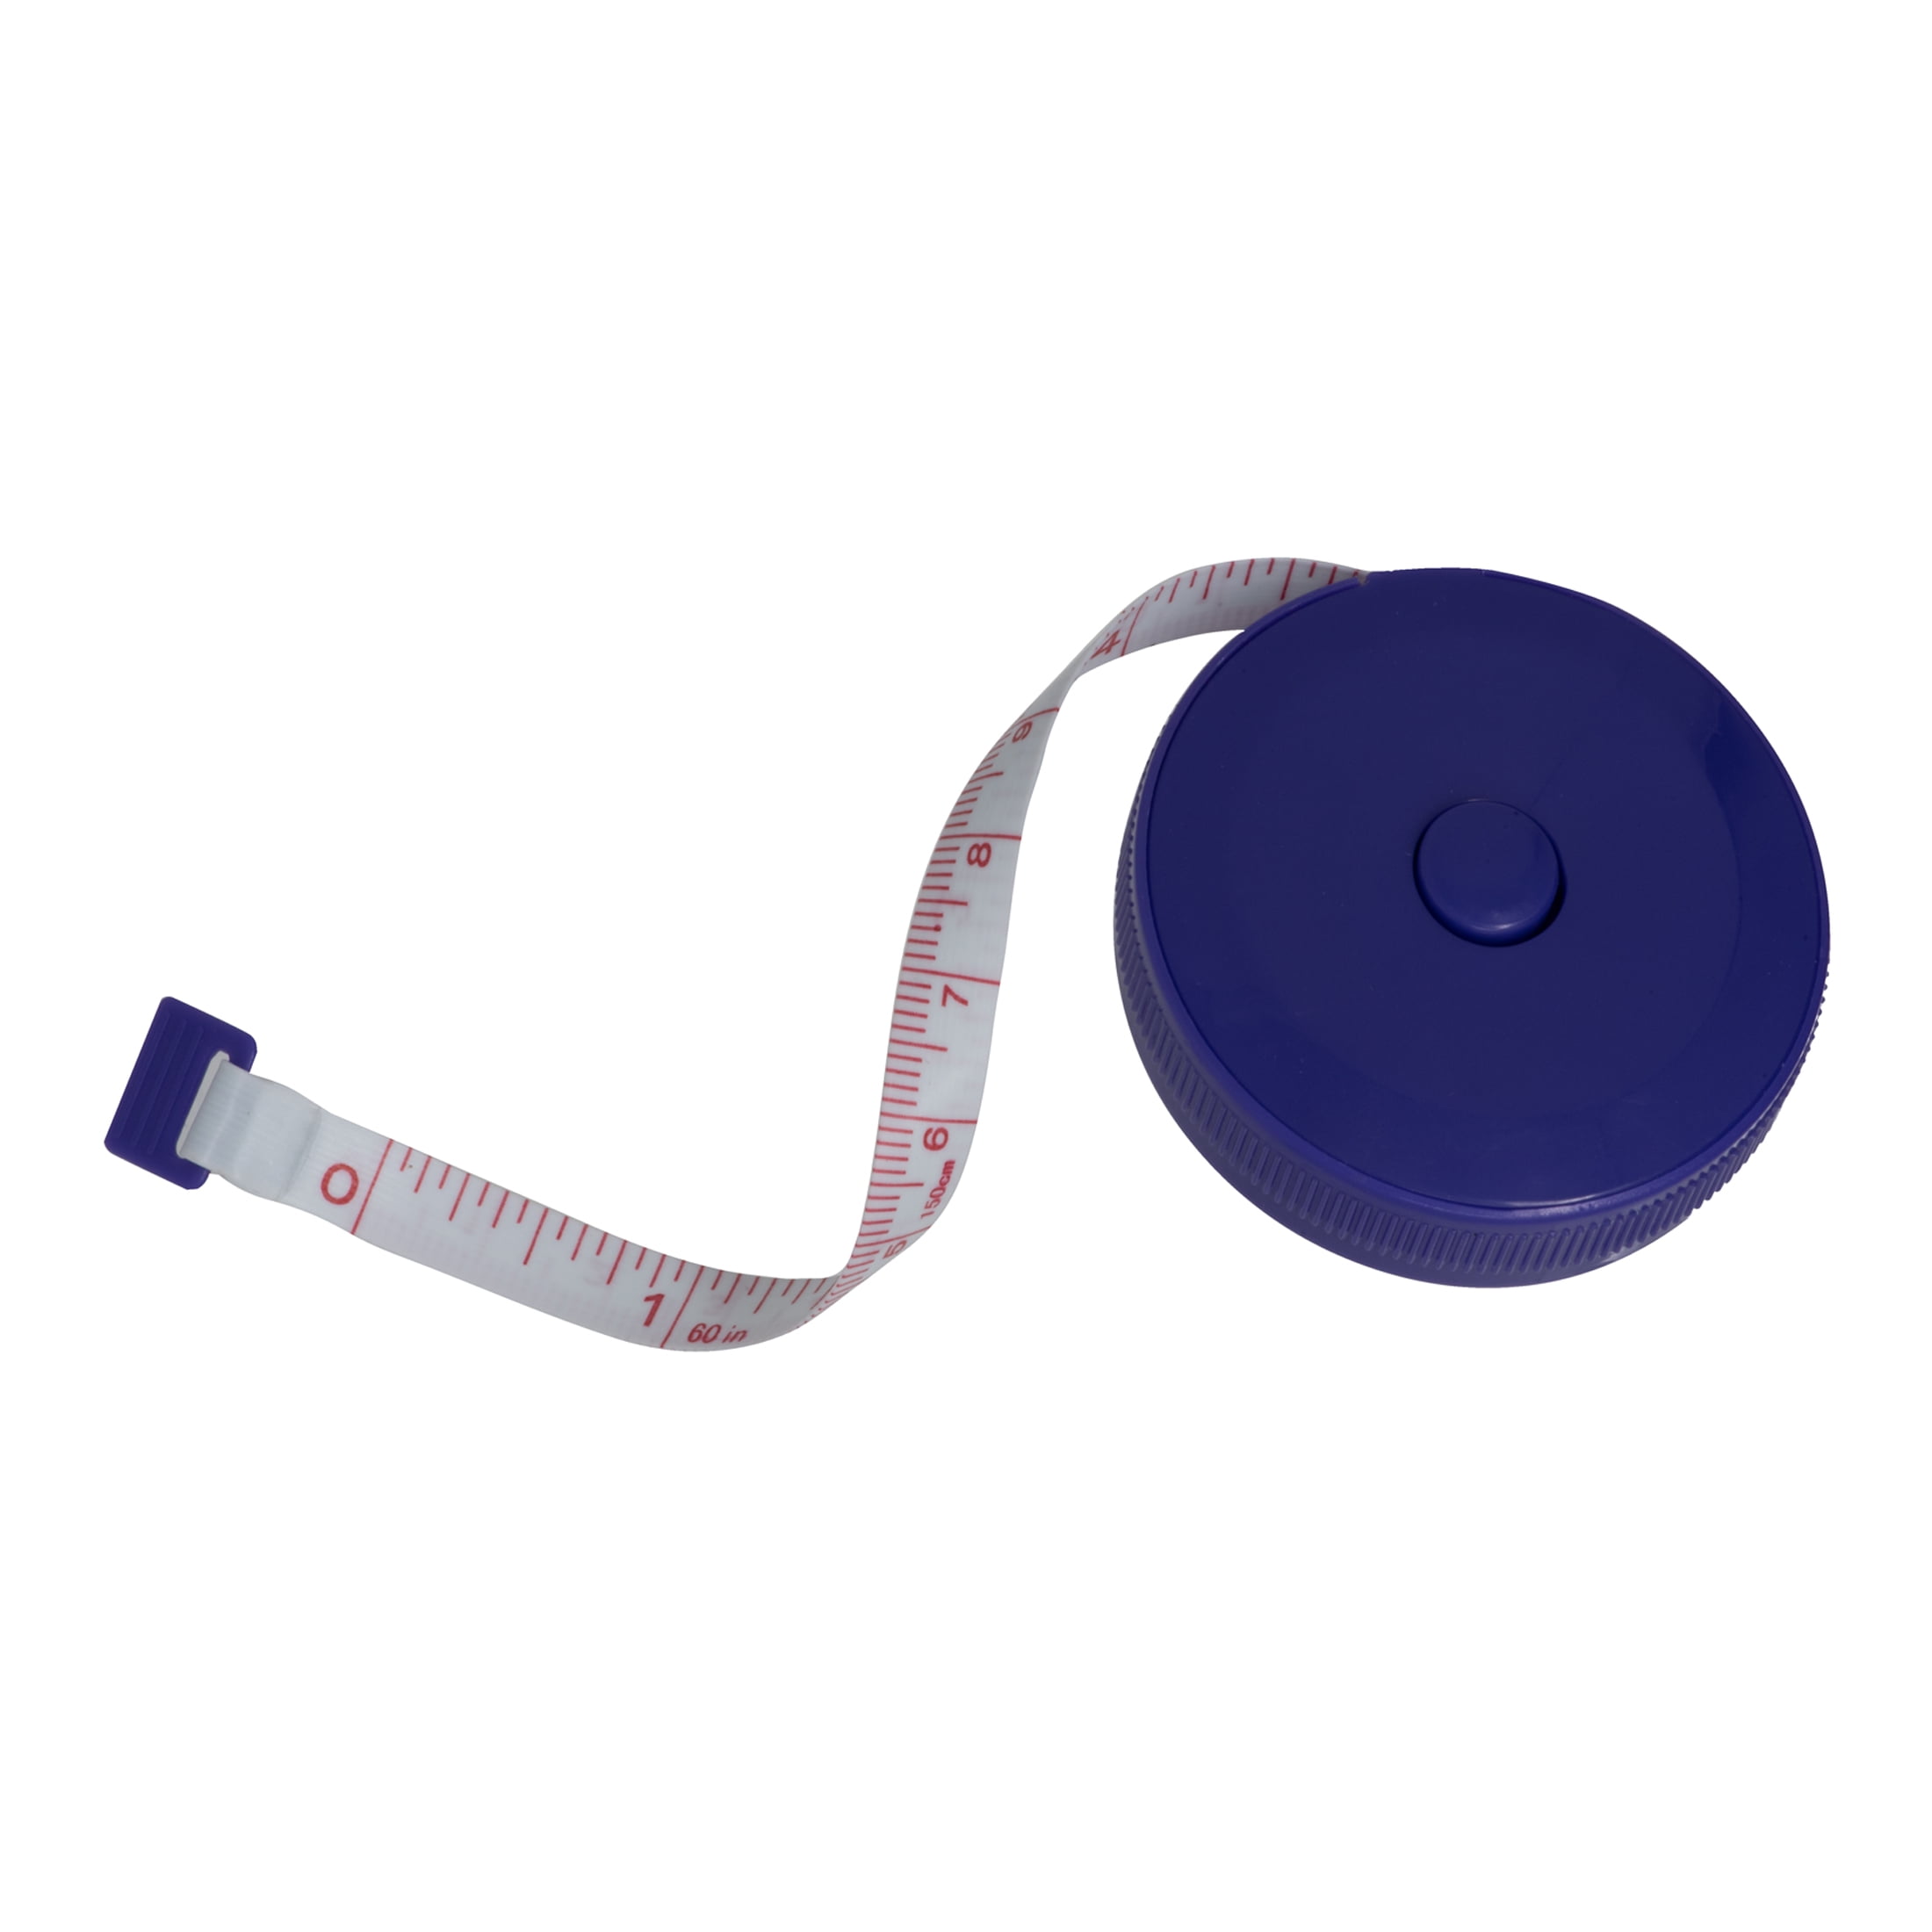 Retractable Tape Measure Archives - Sewing-wisdom